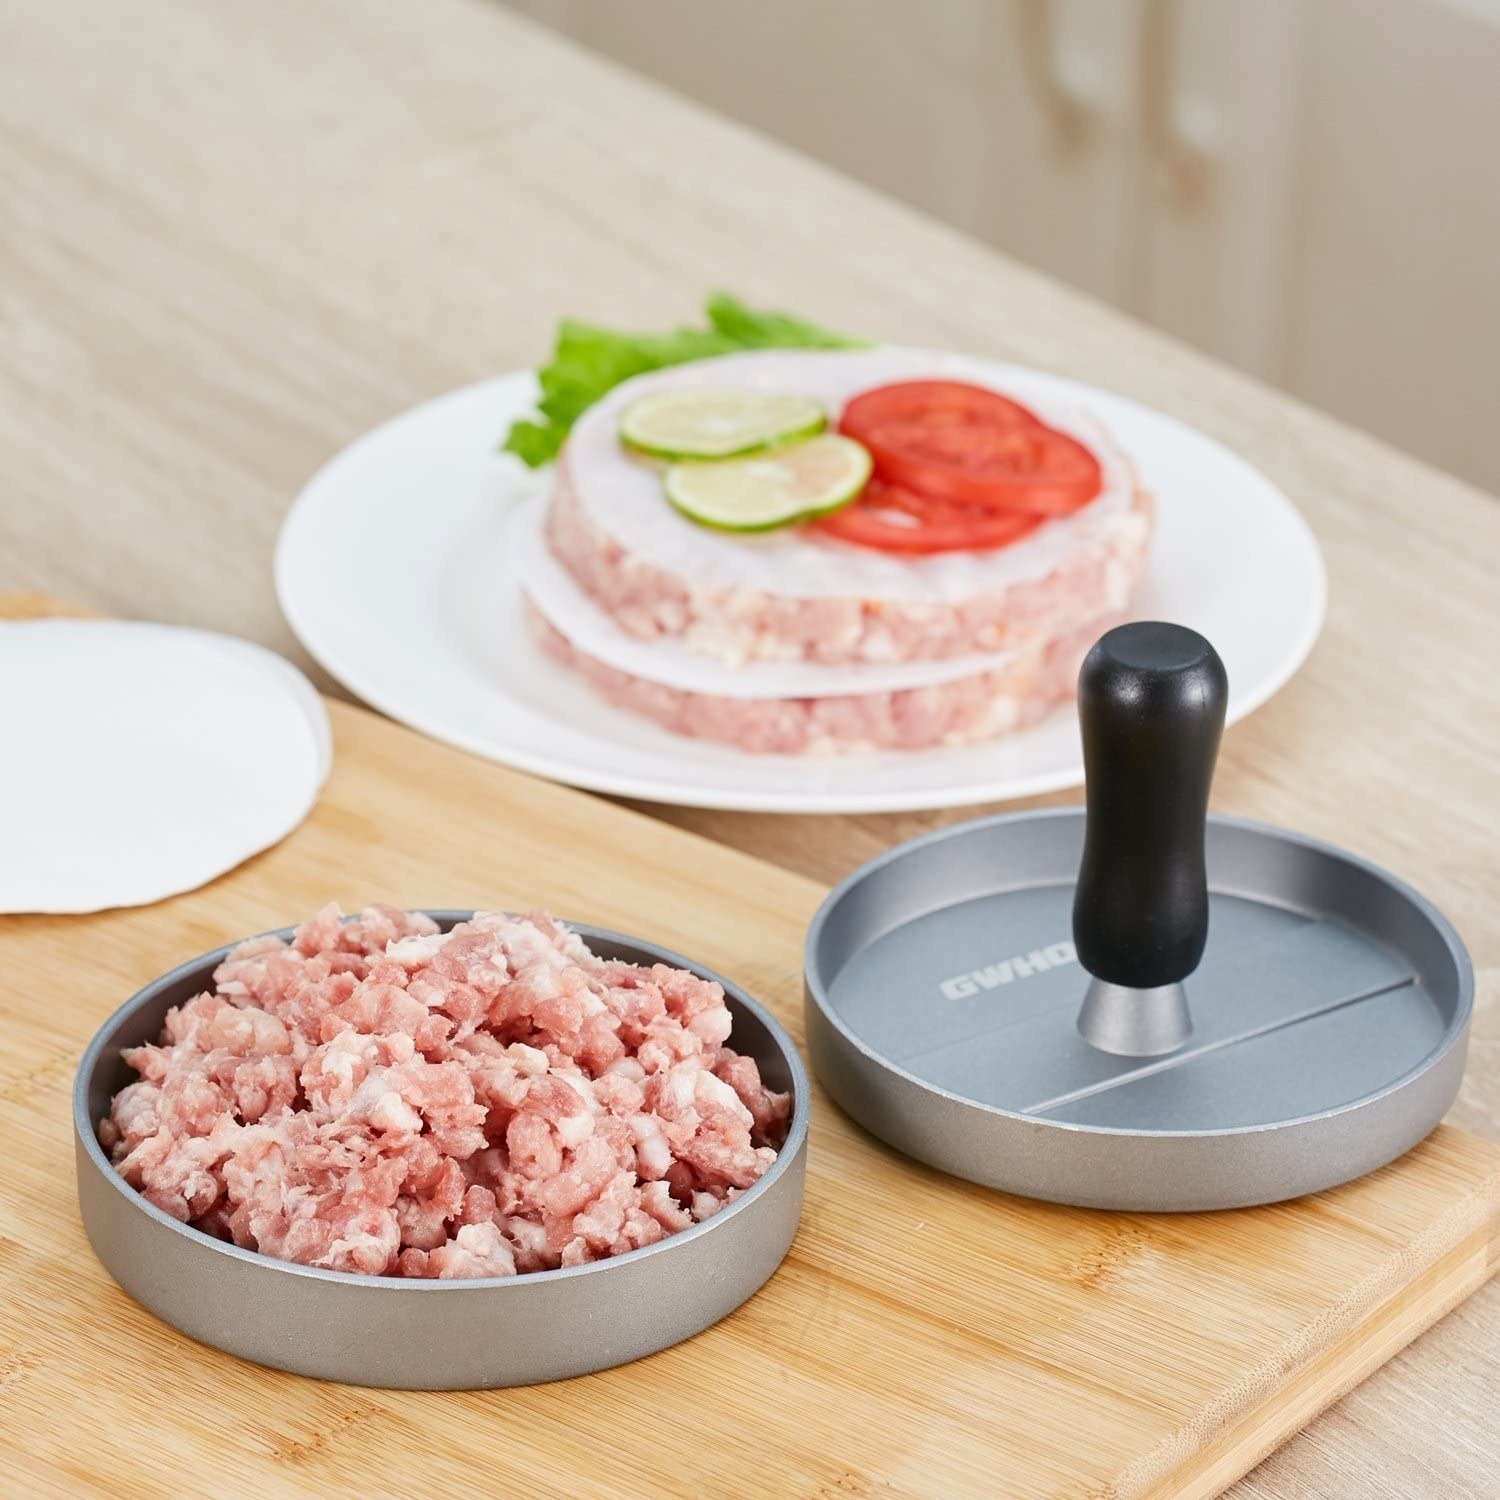 A hamburger press with meat in it